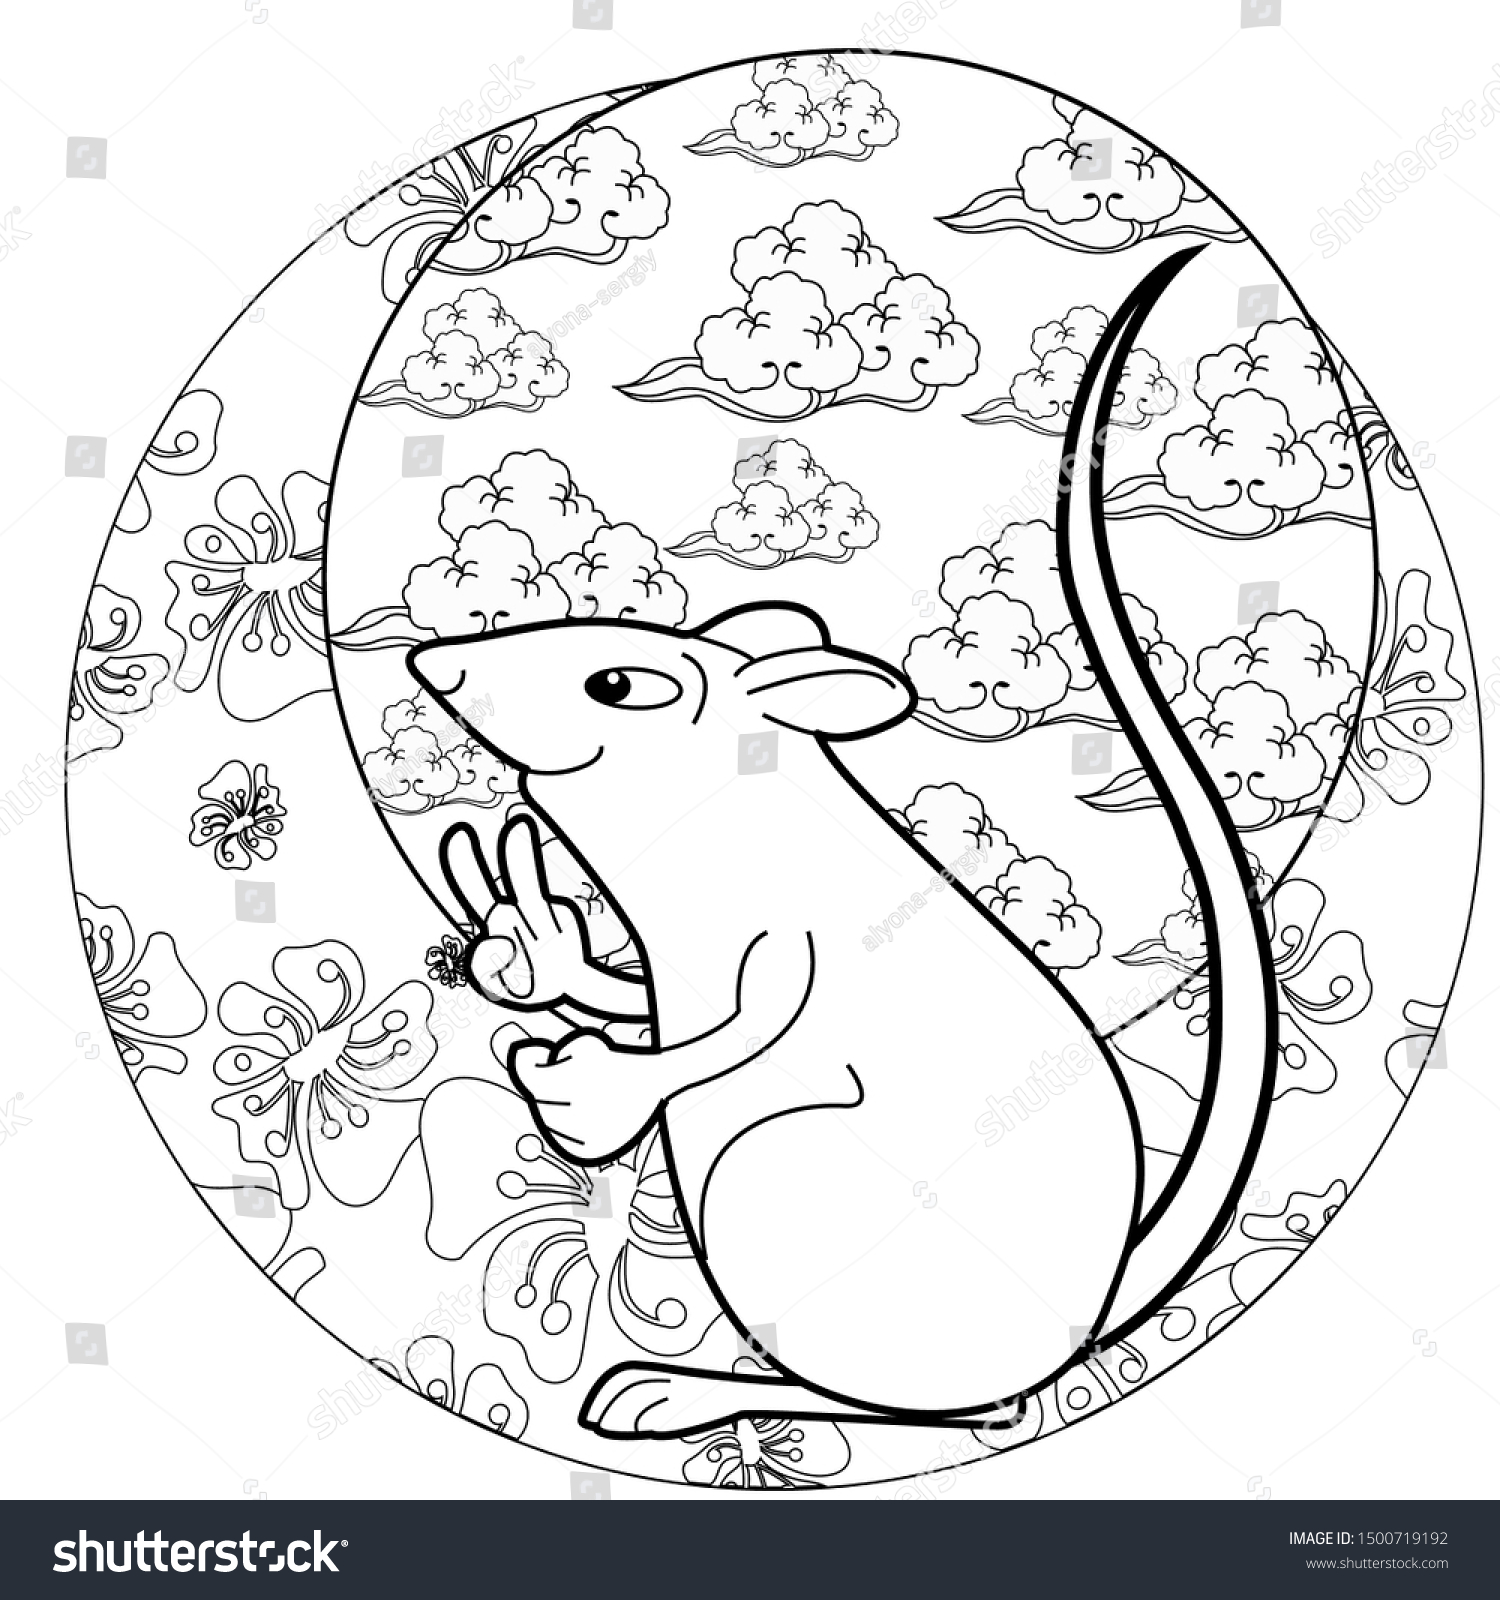 Download Coloring Pages Coloring Book Children Adults Stock Vector Royalty Free 1500719192